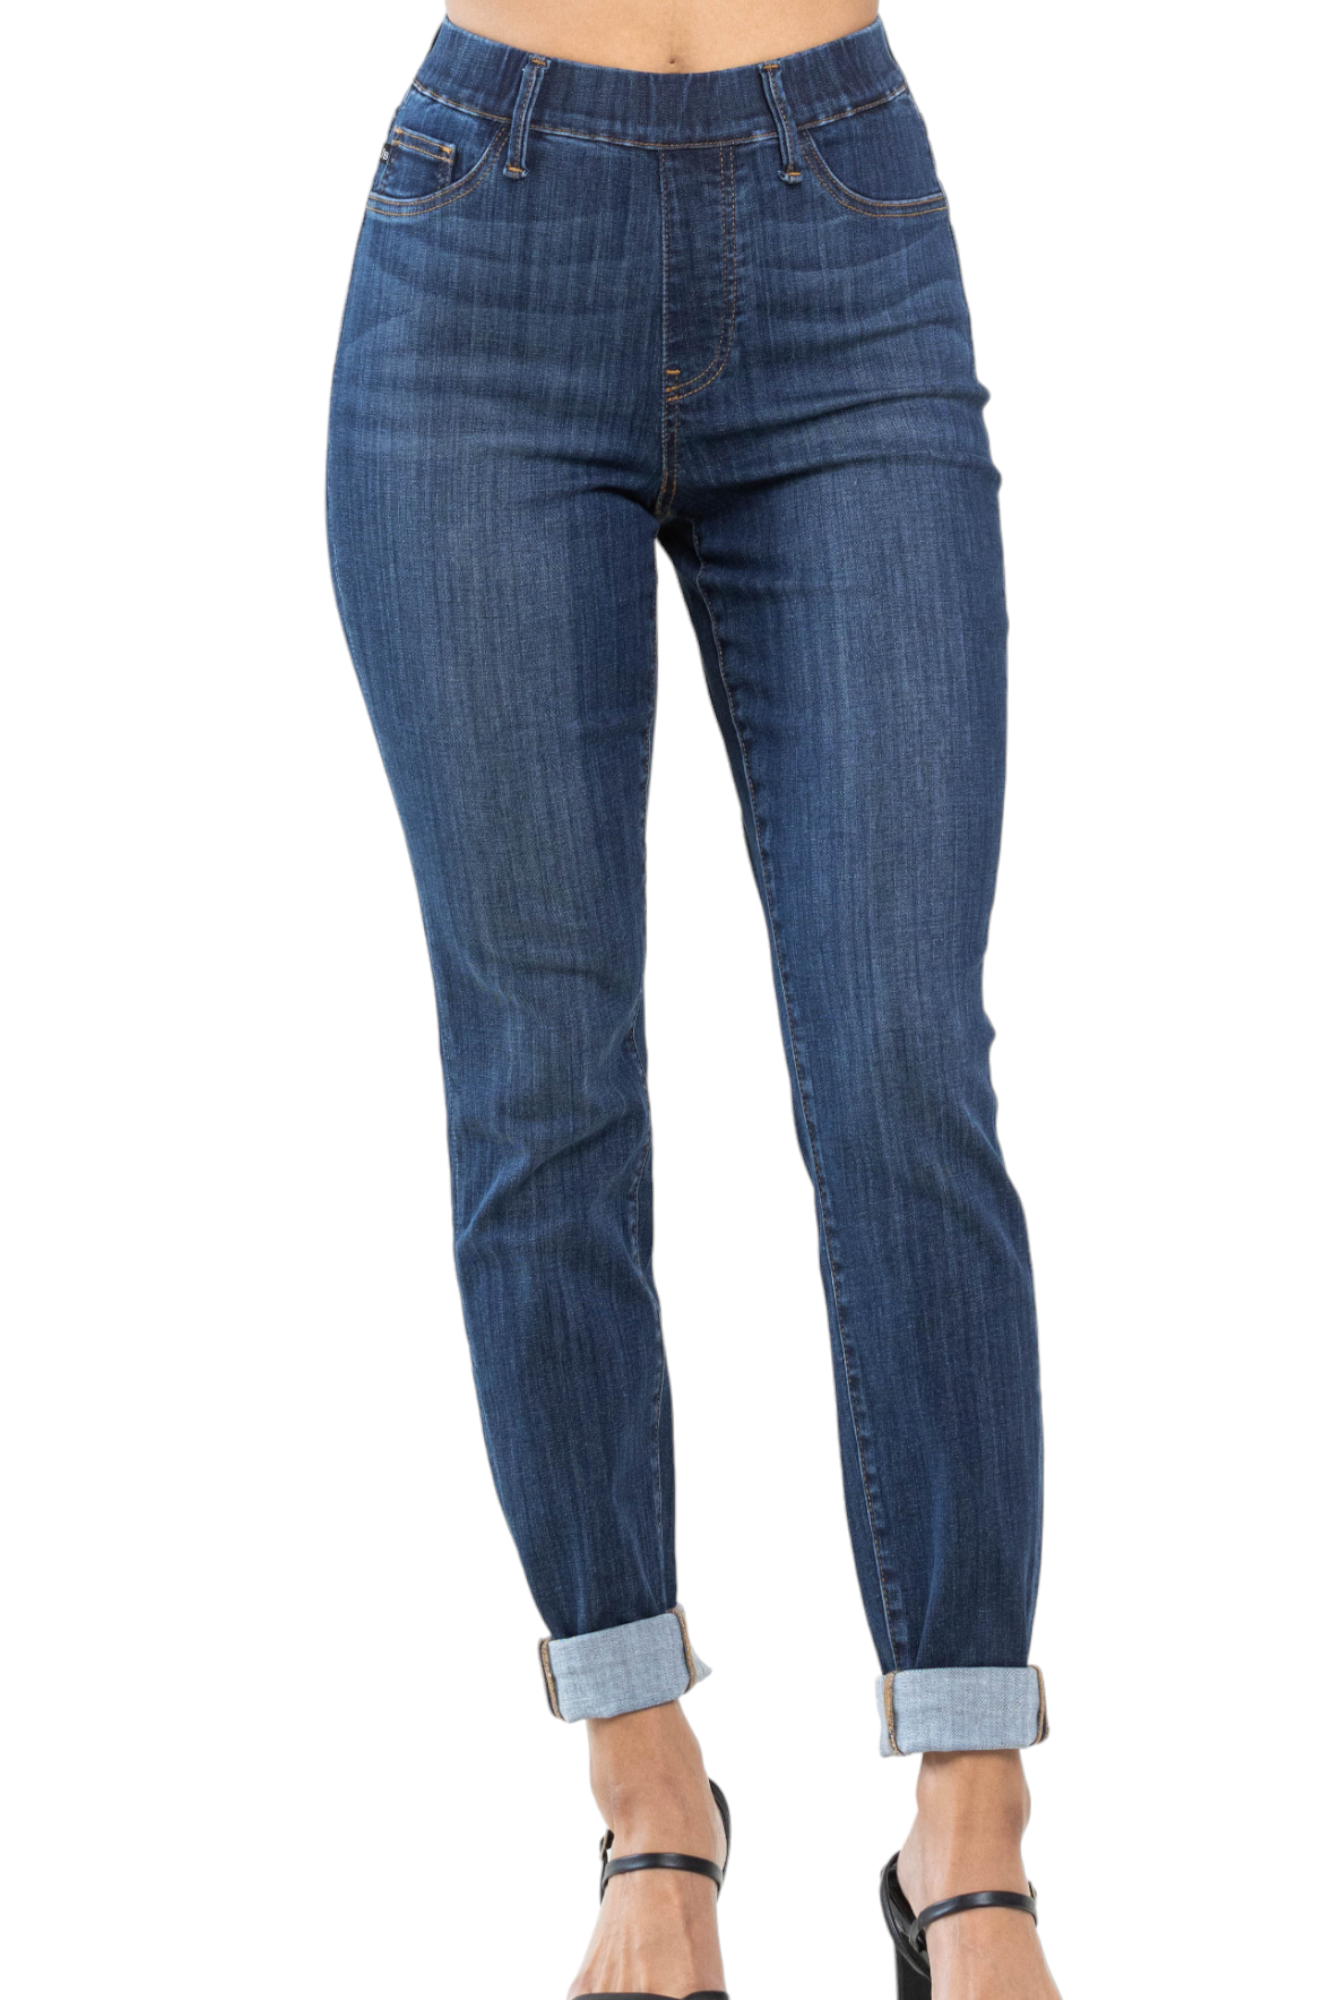 All-Day Slim Fit Judy Blue Jeans